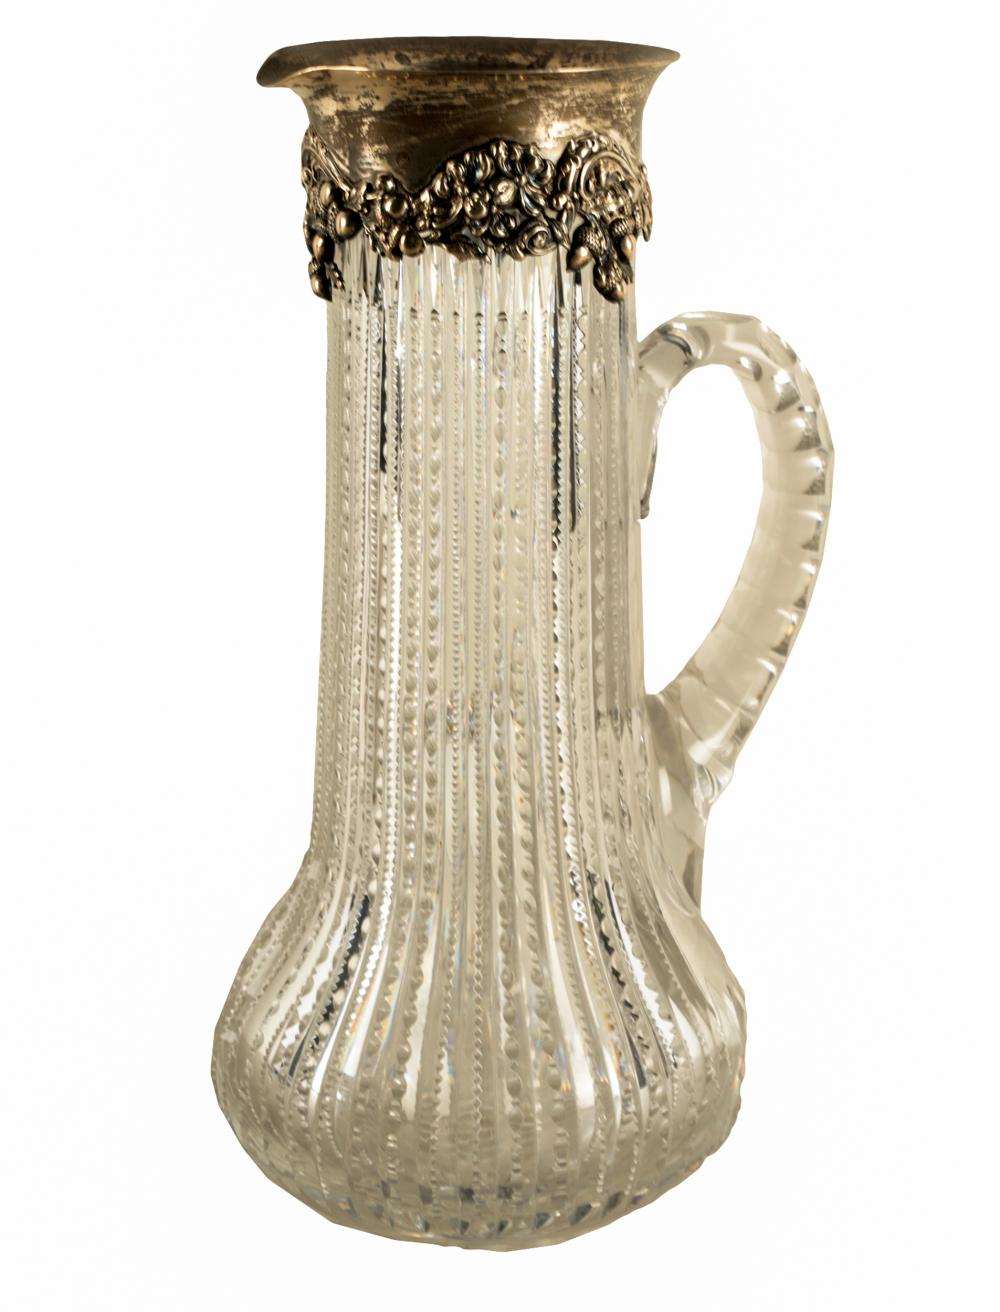 AMERICAN STERLING-MOUNTED CUT-GLASS